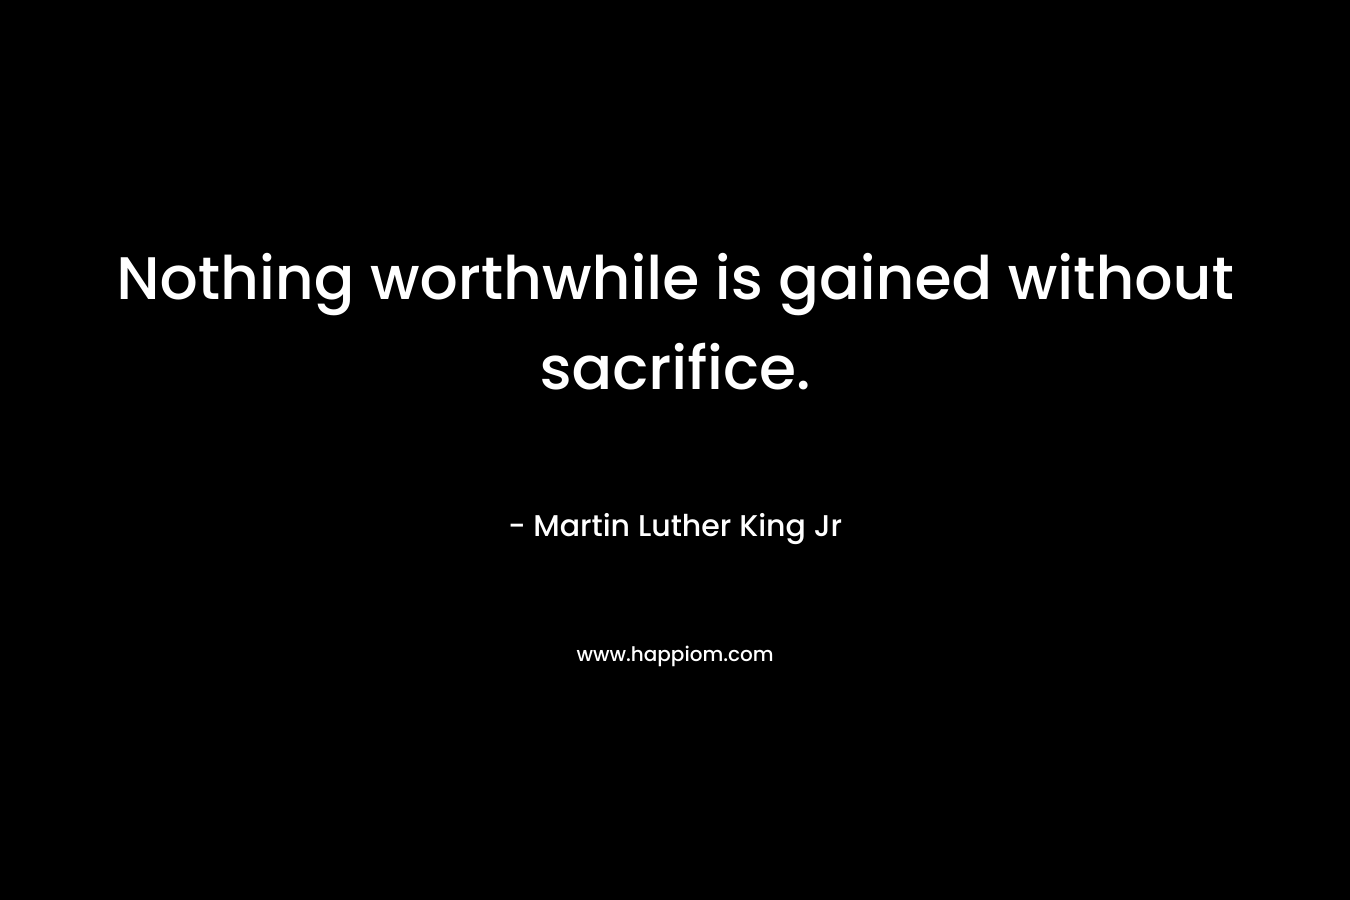 Nothing worthwhile is gained without sacrifice. – Martin Luther King Jr